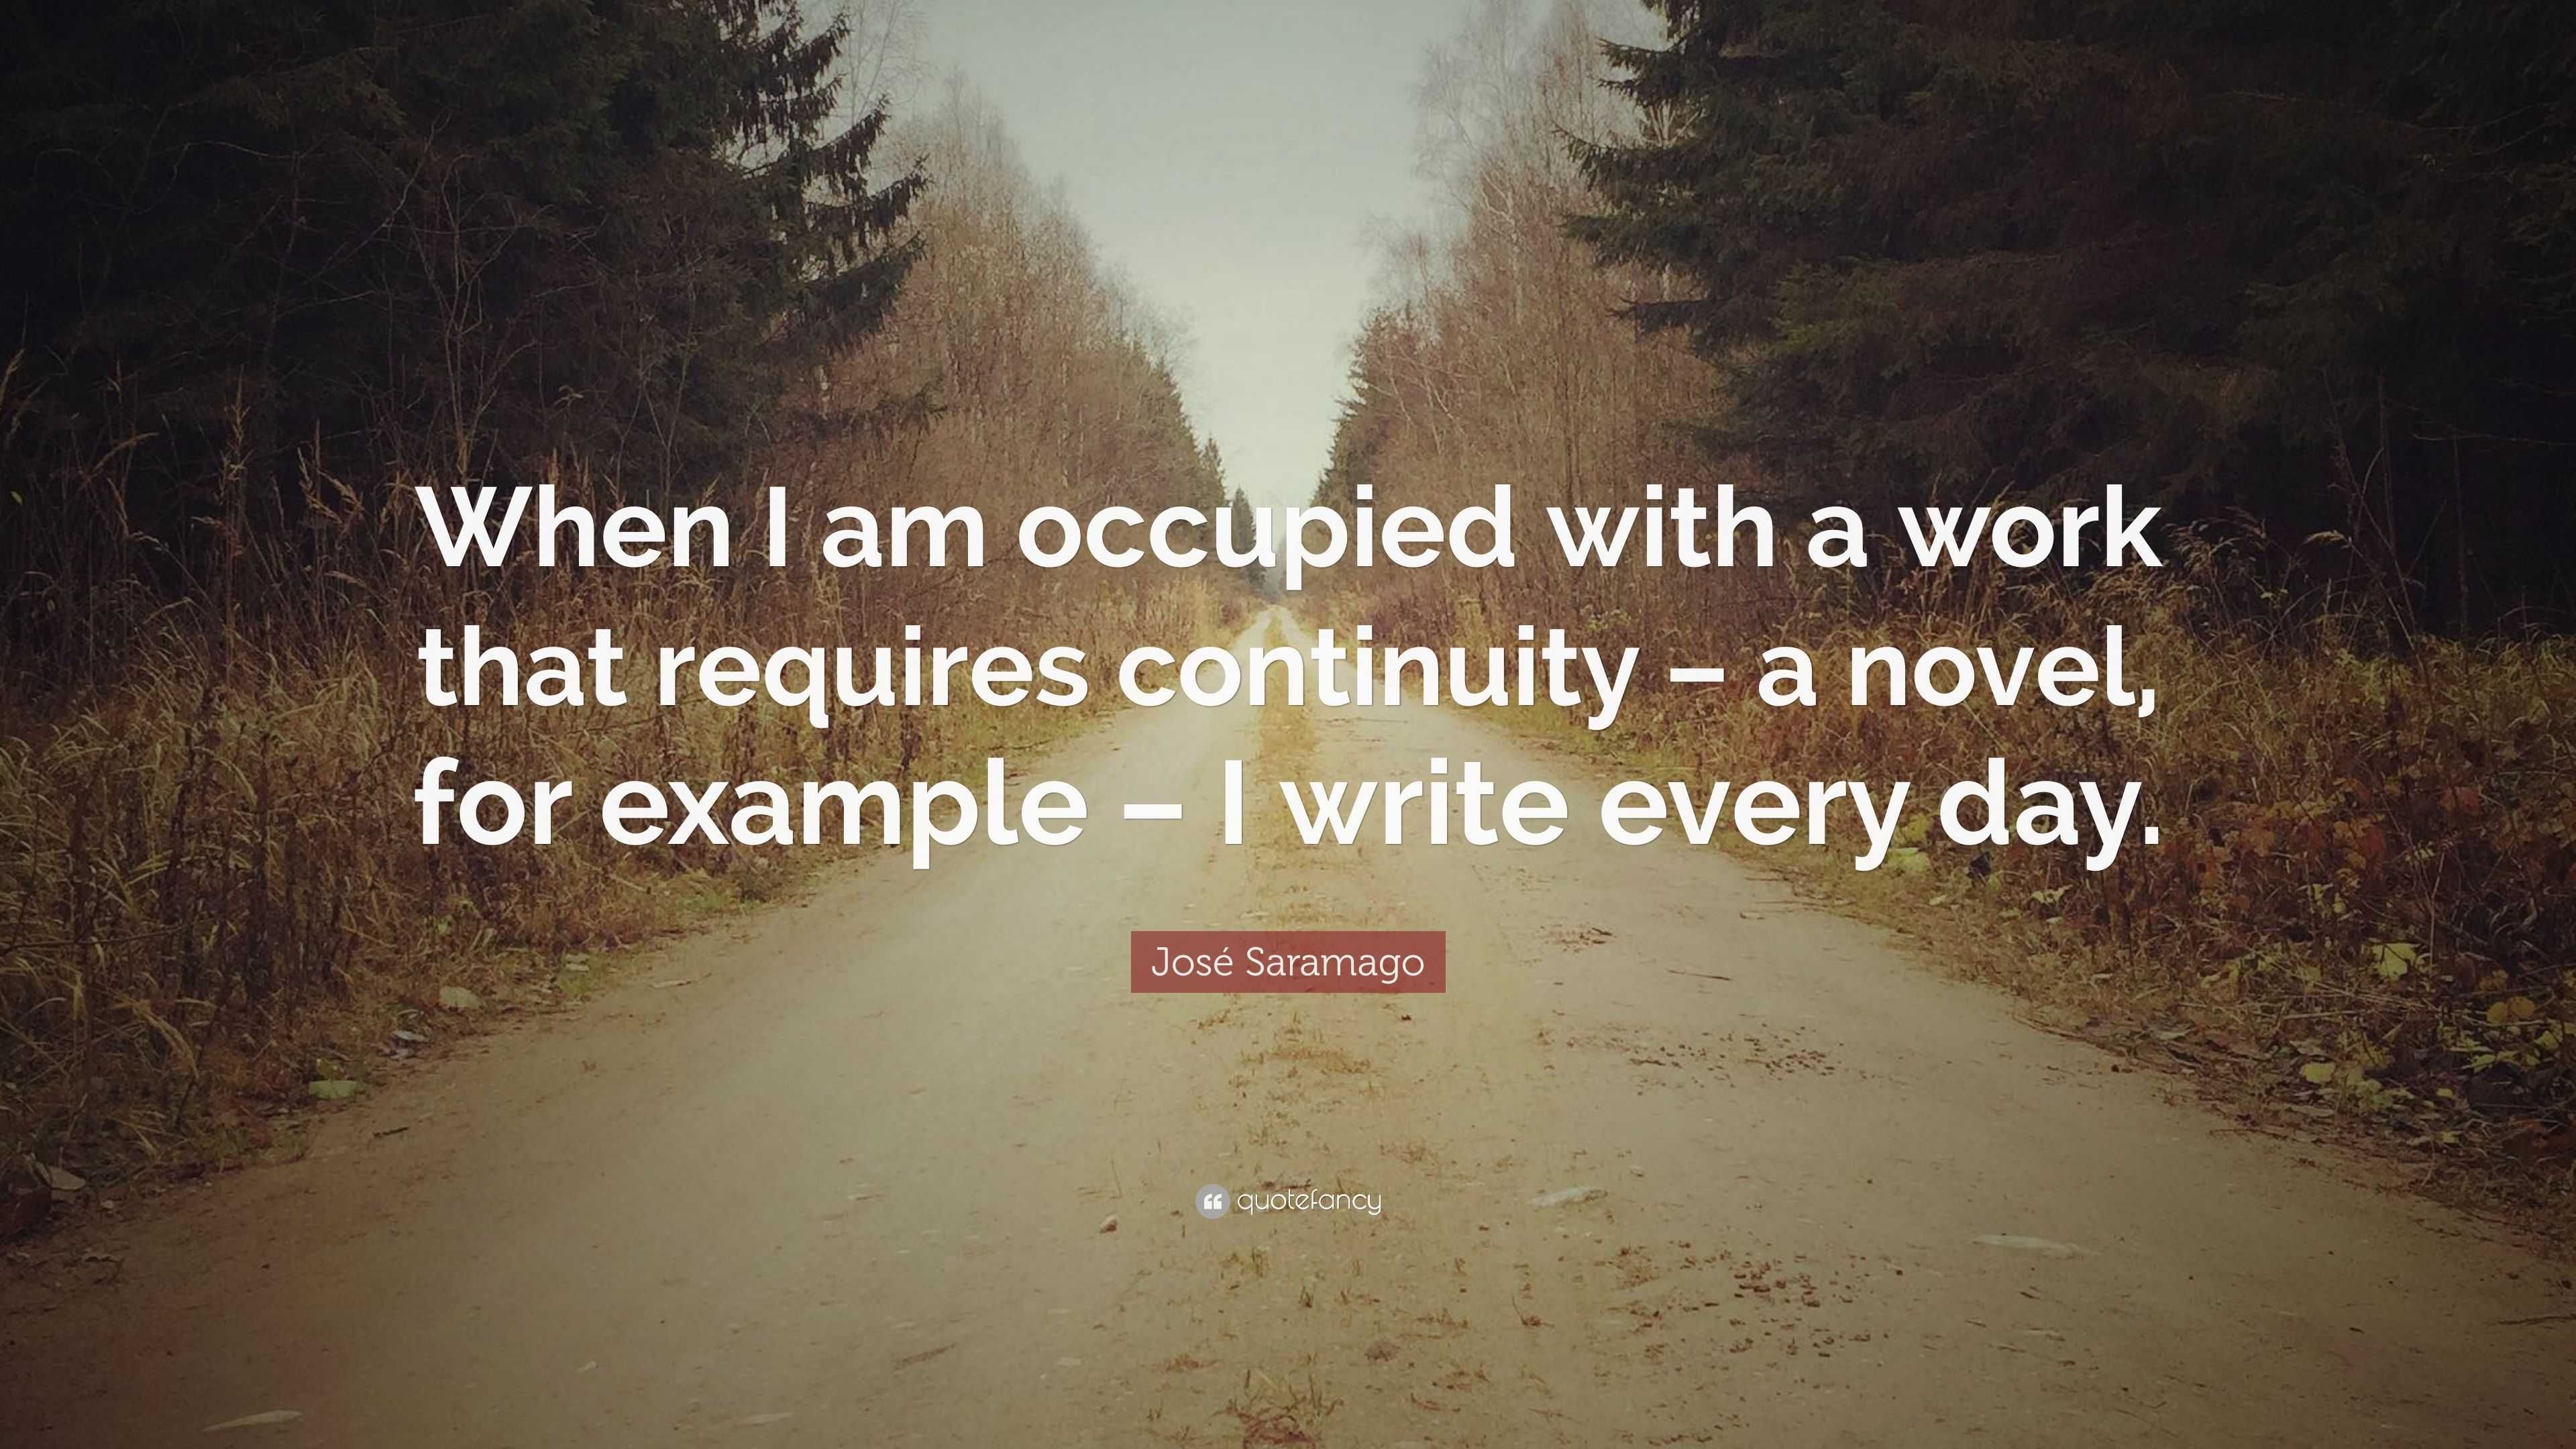 José Saramago Quote: “When I am occupied with a work that requires  continuity – a novel, for